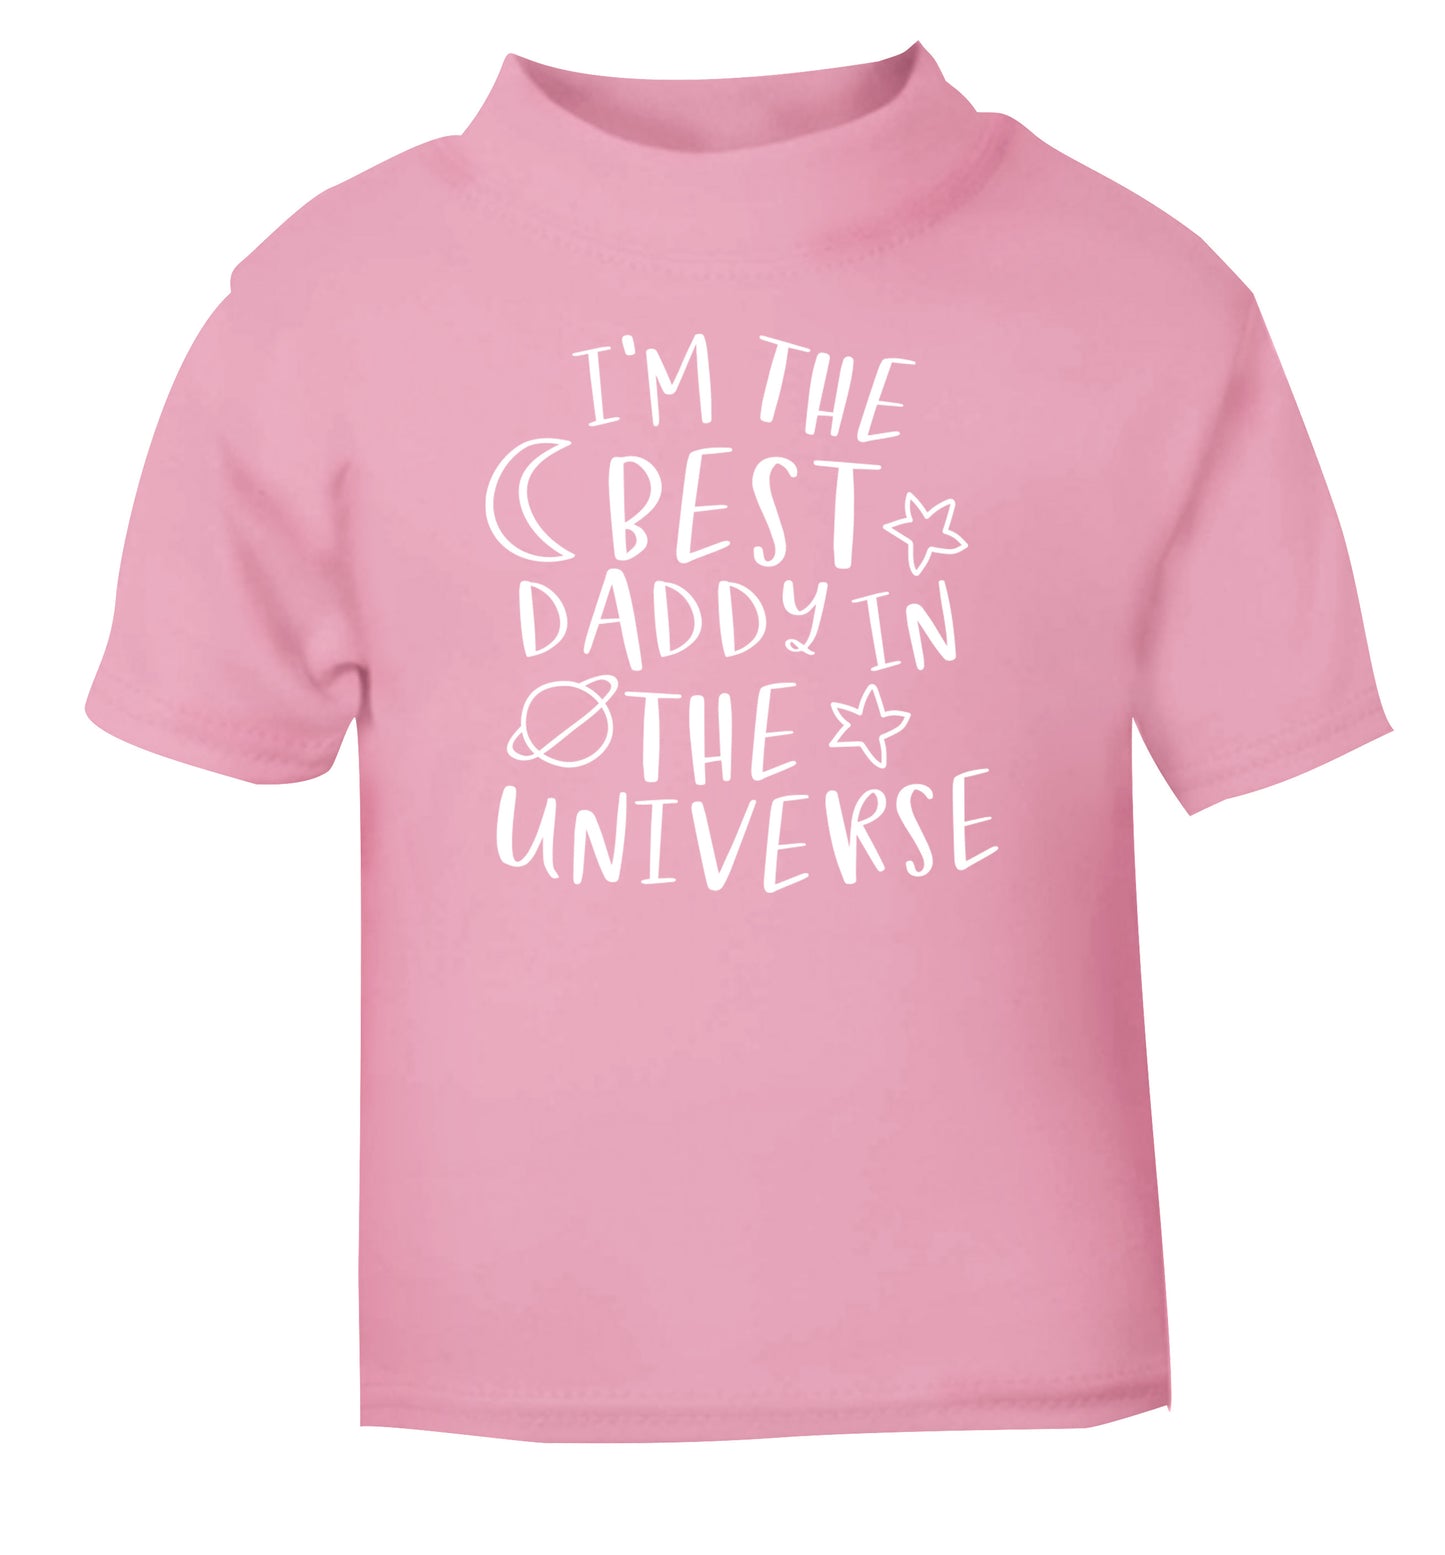 I'm the best daddy in the universe light pink Baby Toddler Tshirt 2 Years